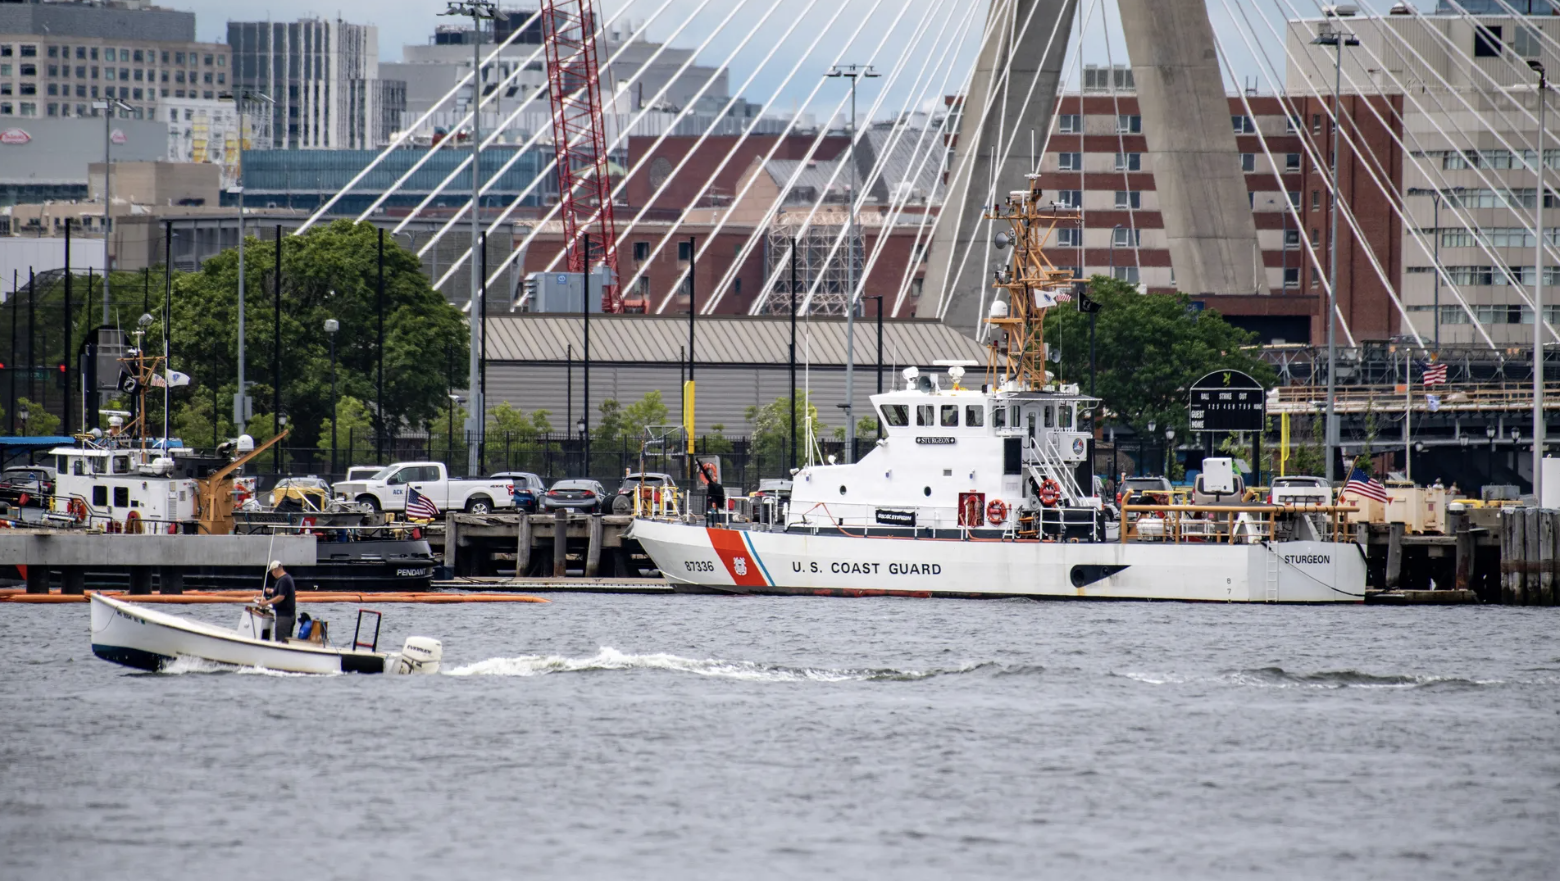 A U.S. Coast Guard vessel sits in port on Monday in Boston Harbor across from the U.S. Coast Guard Station Boston in Boston, Massachusetts, which is leading the search for the missing submersible craft. 